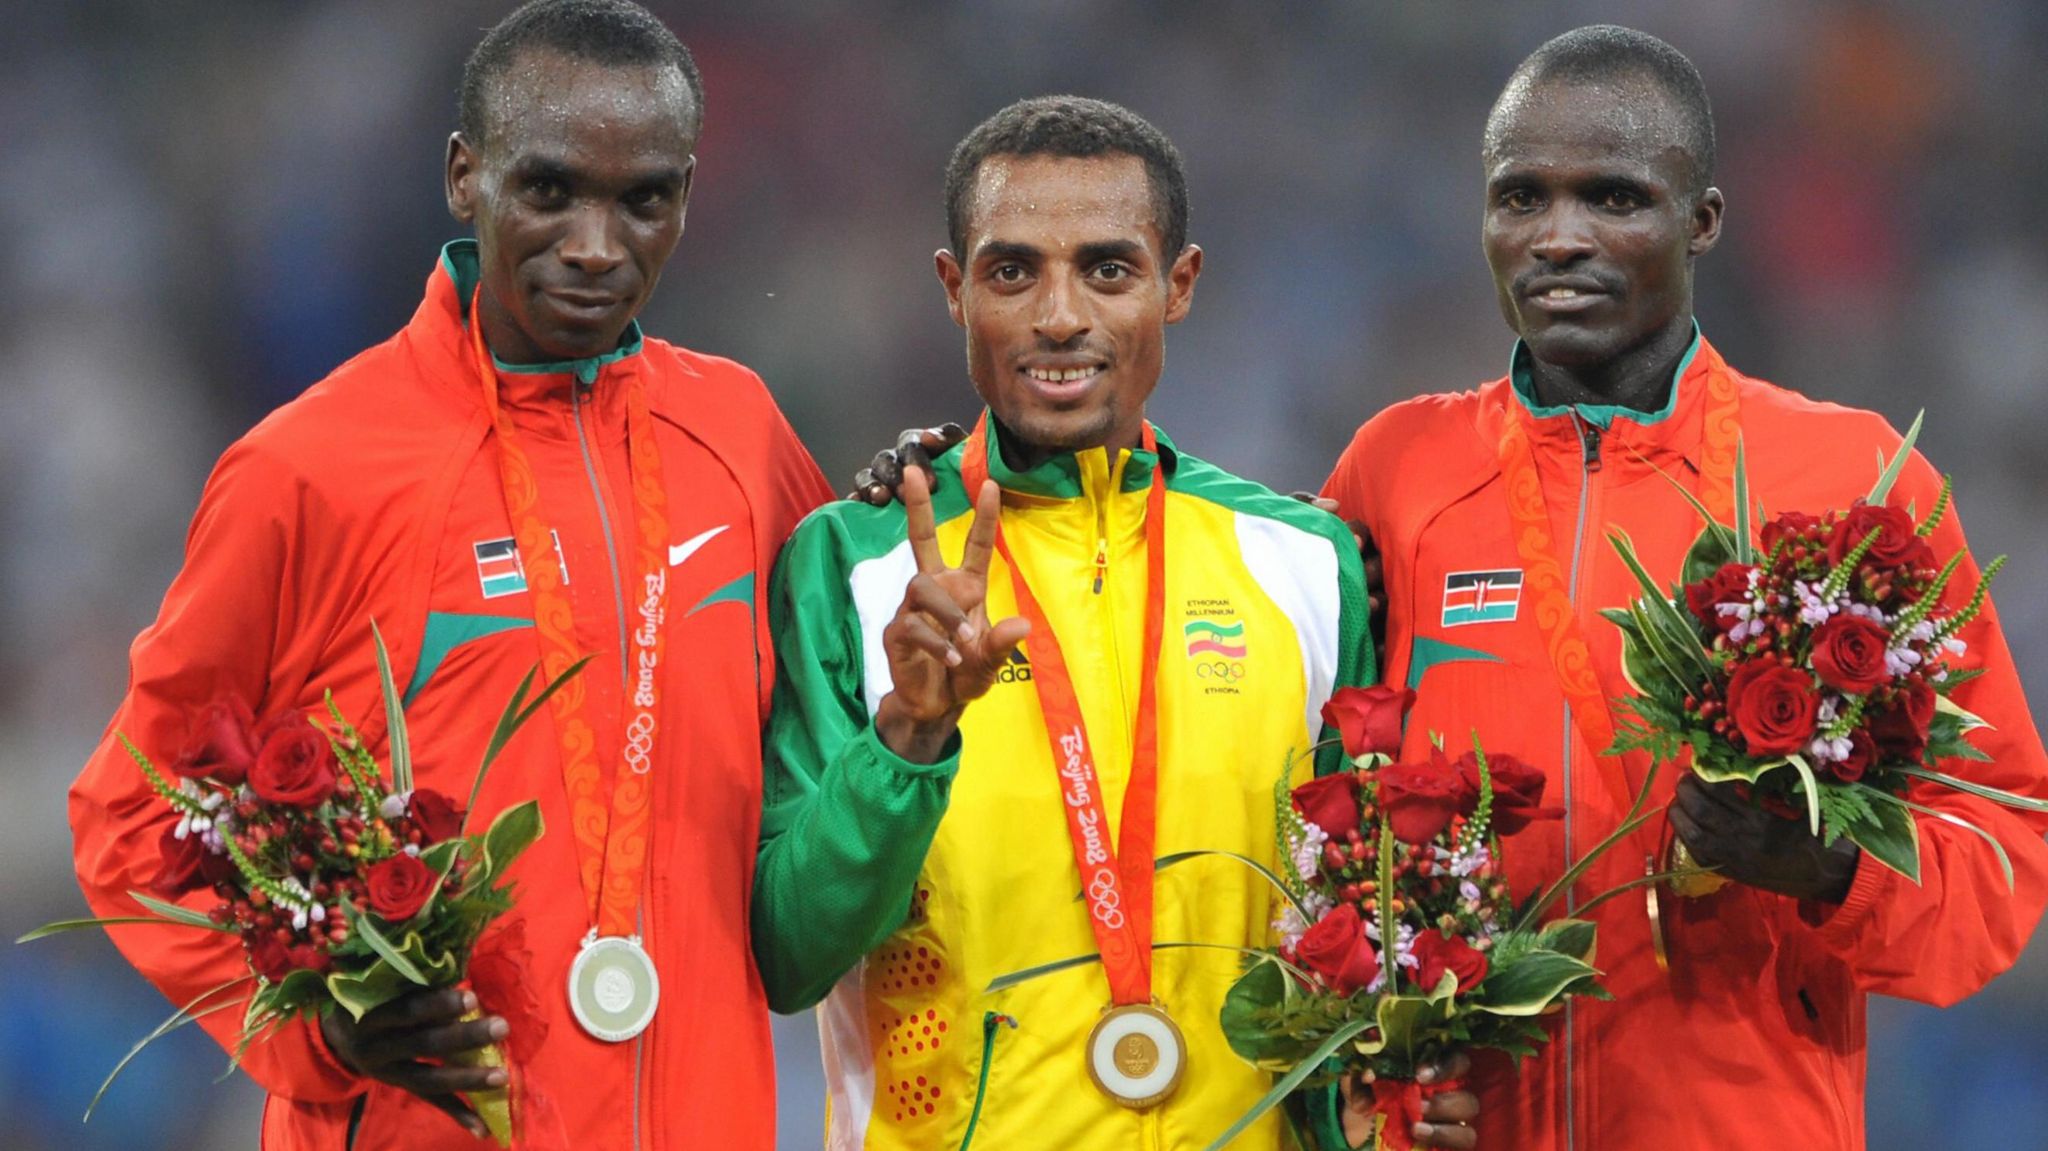 Kenya's Eliud Kipchoge, Ethiopia's Kenenisa Bekele and Kenya's Edwin Cheruiyot Soi pose on the podium during the medal ceremony for the men's 5000m at the Beijing 2008 Olympic Games